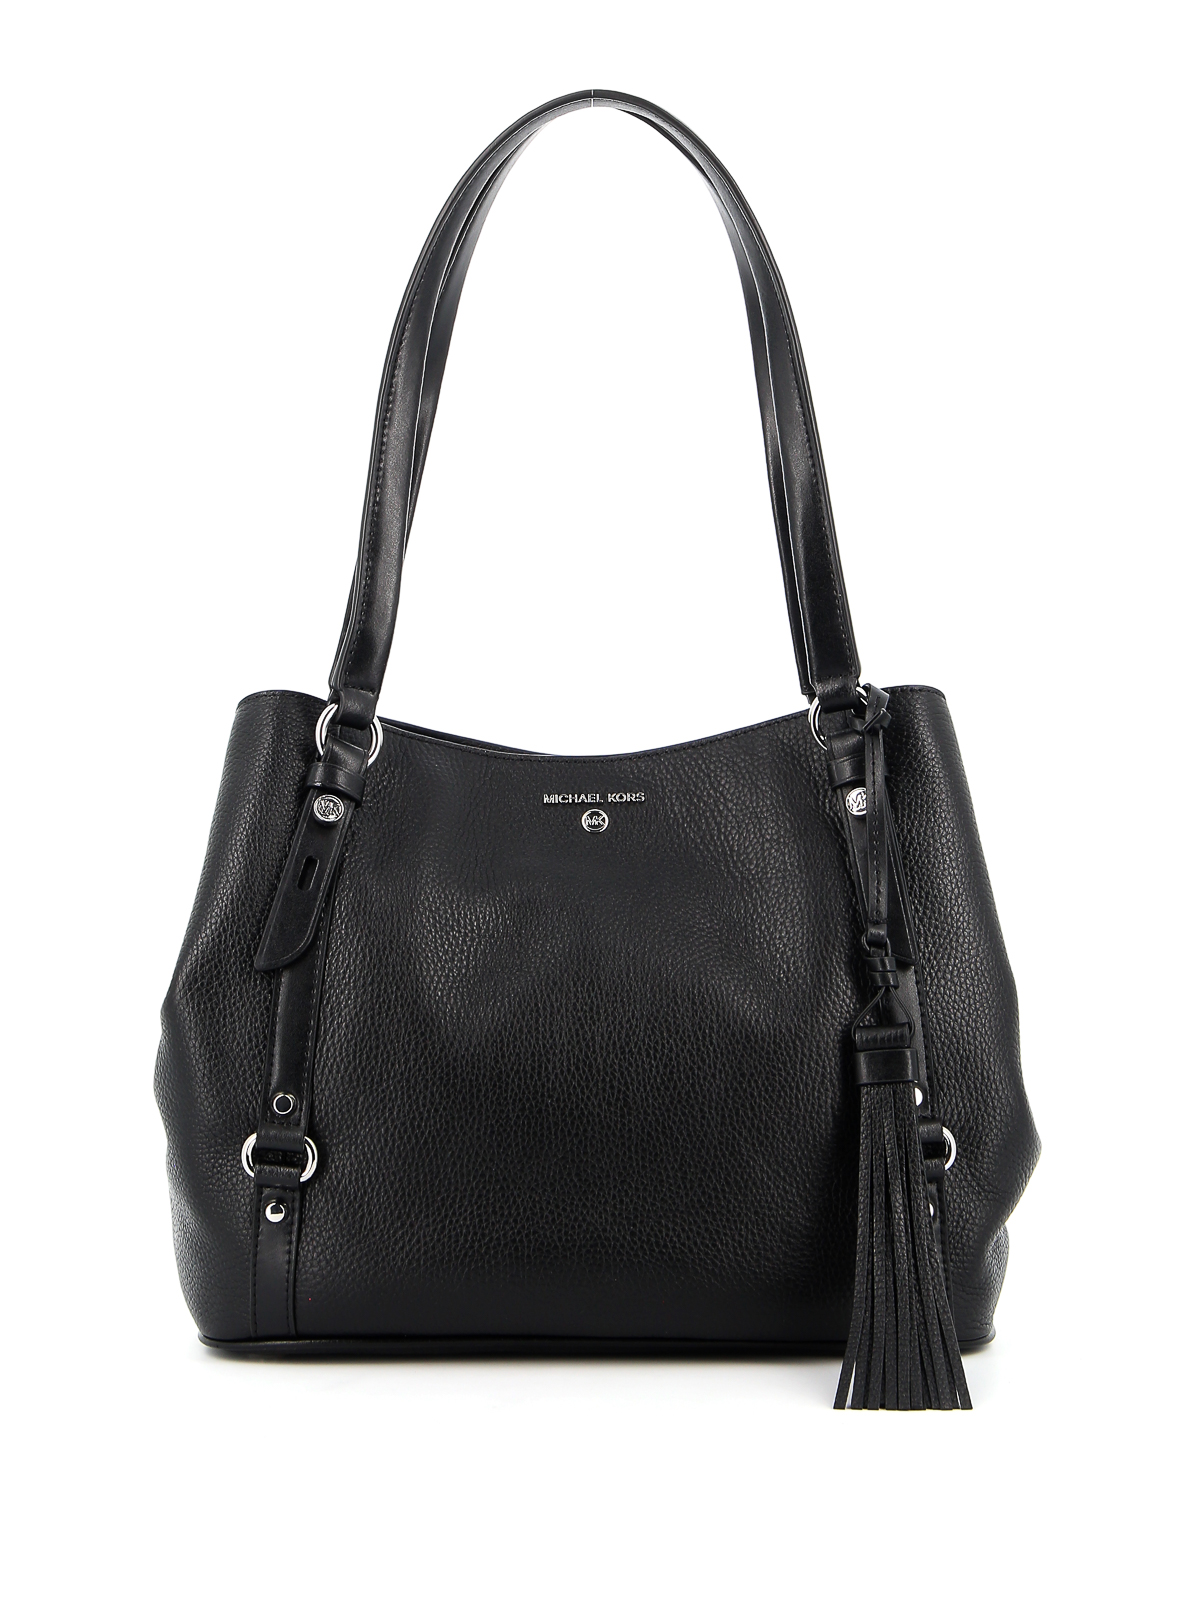 Totes bags Michael Kors - Carrie shoulder tote - 30F0S1AE3L001 | iKRIX.com